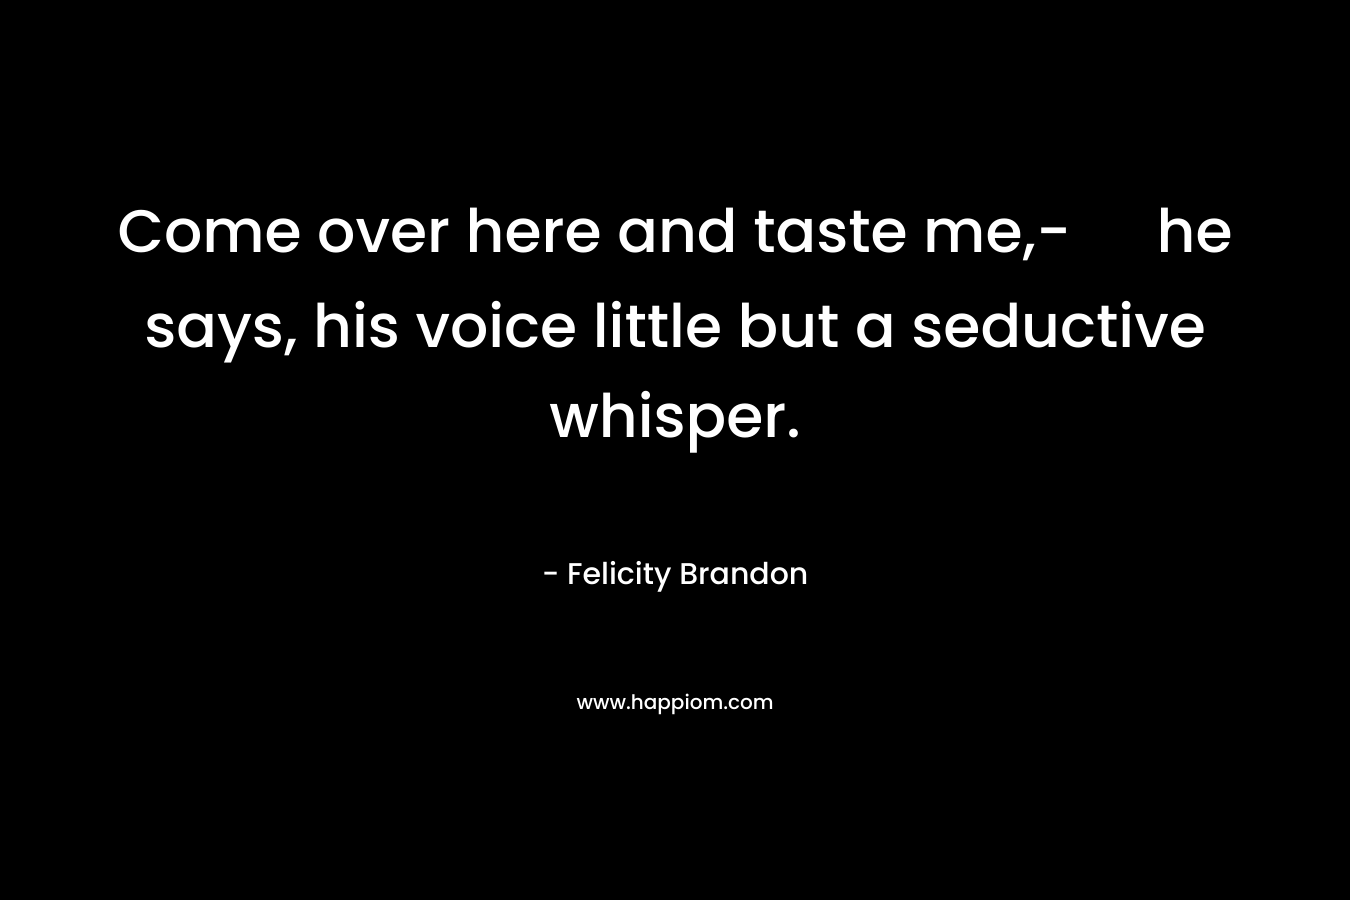 Come over here and taste me,- he says, his voice little but a seductive whisper. – Felicity Brandon